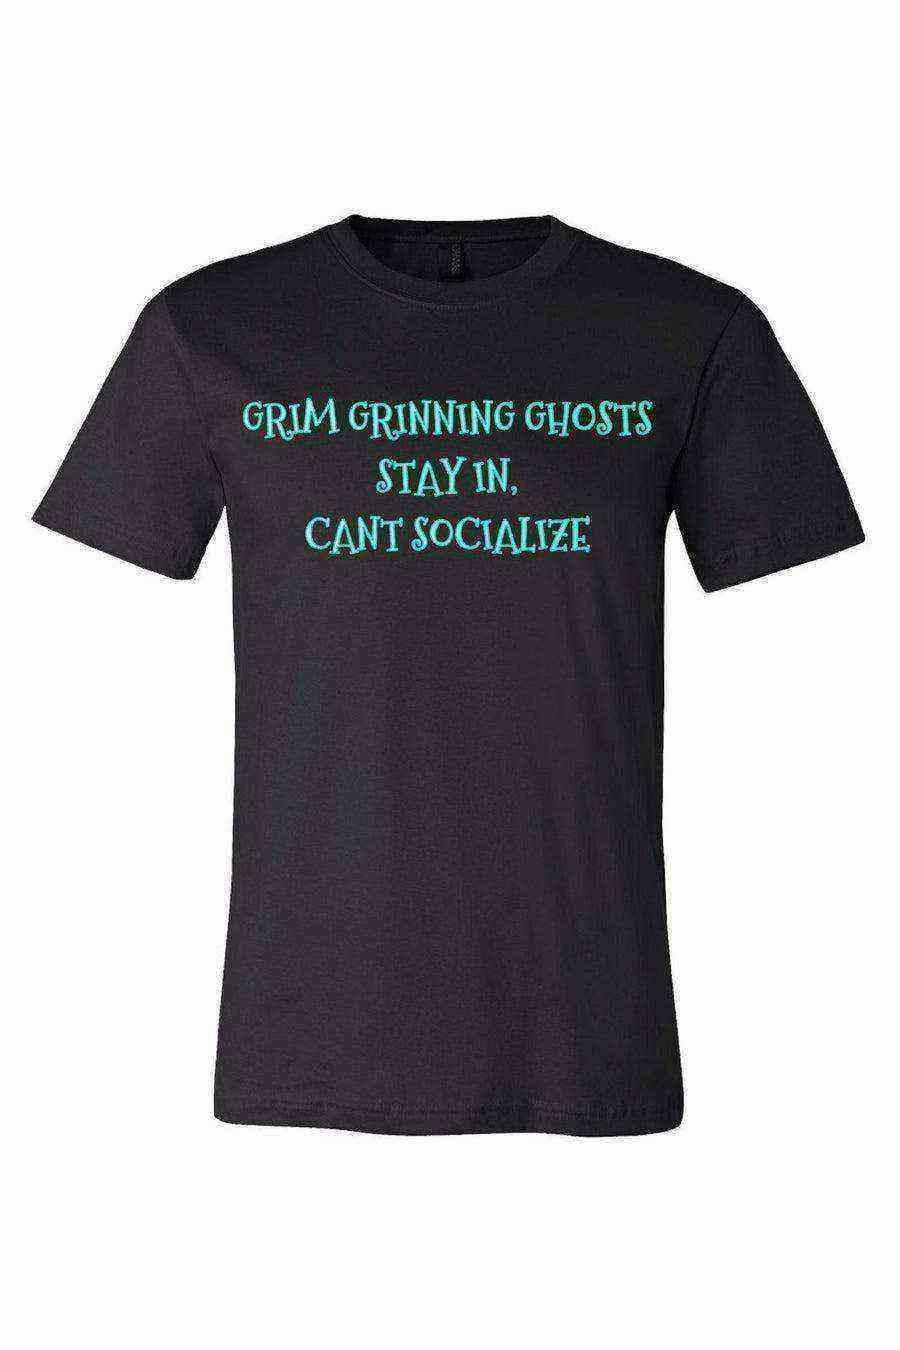 Youth | Grim Grinning Ghosts Stay In Can’t Socialize Shirt | Haunted Mansion | Social Distance - Dylan's Tees